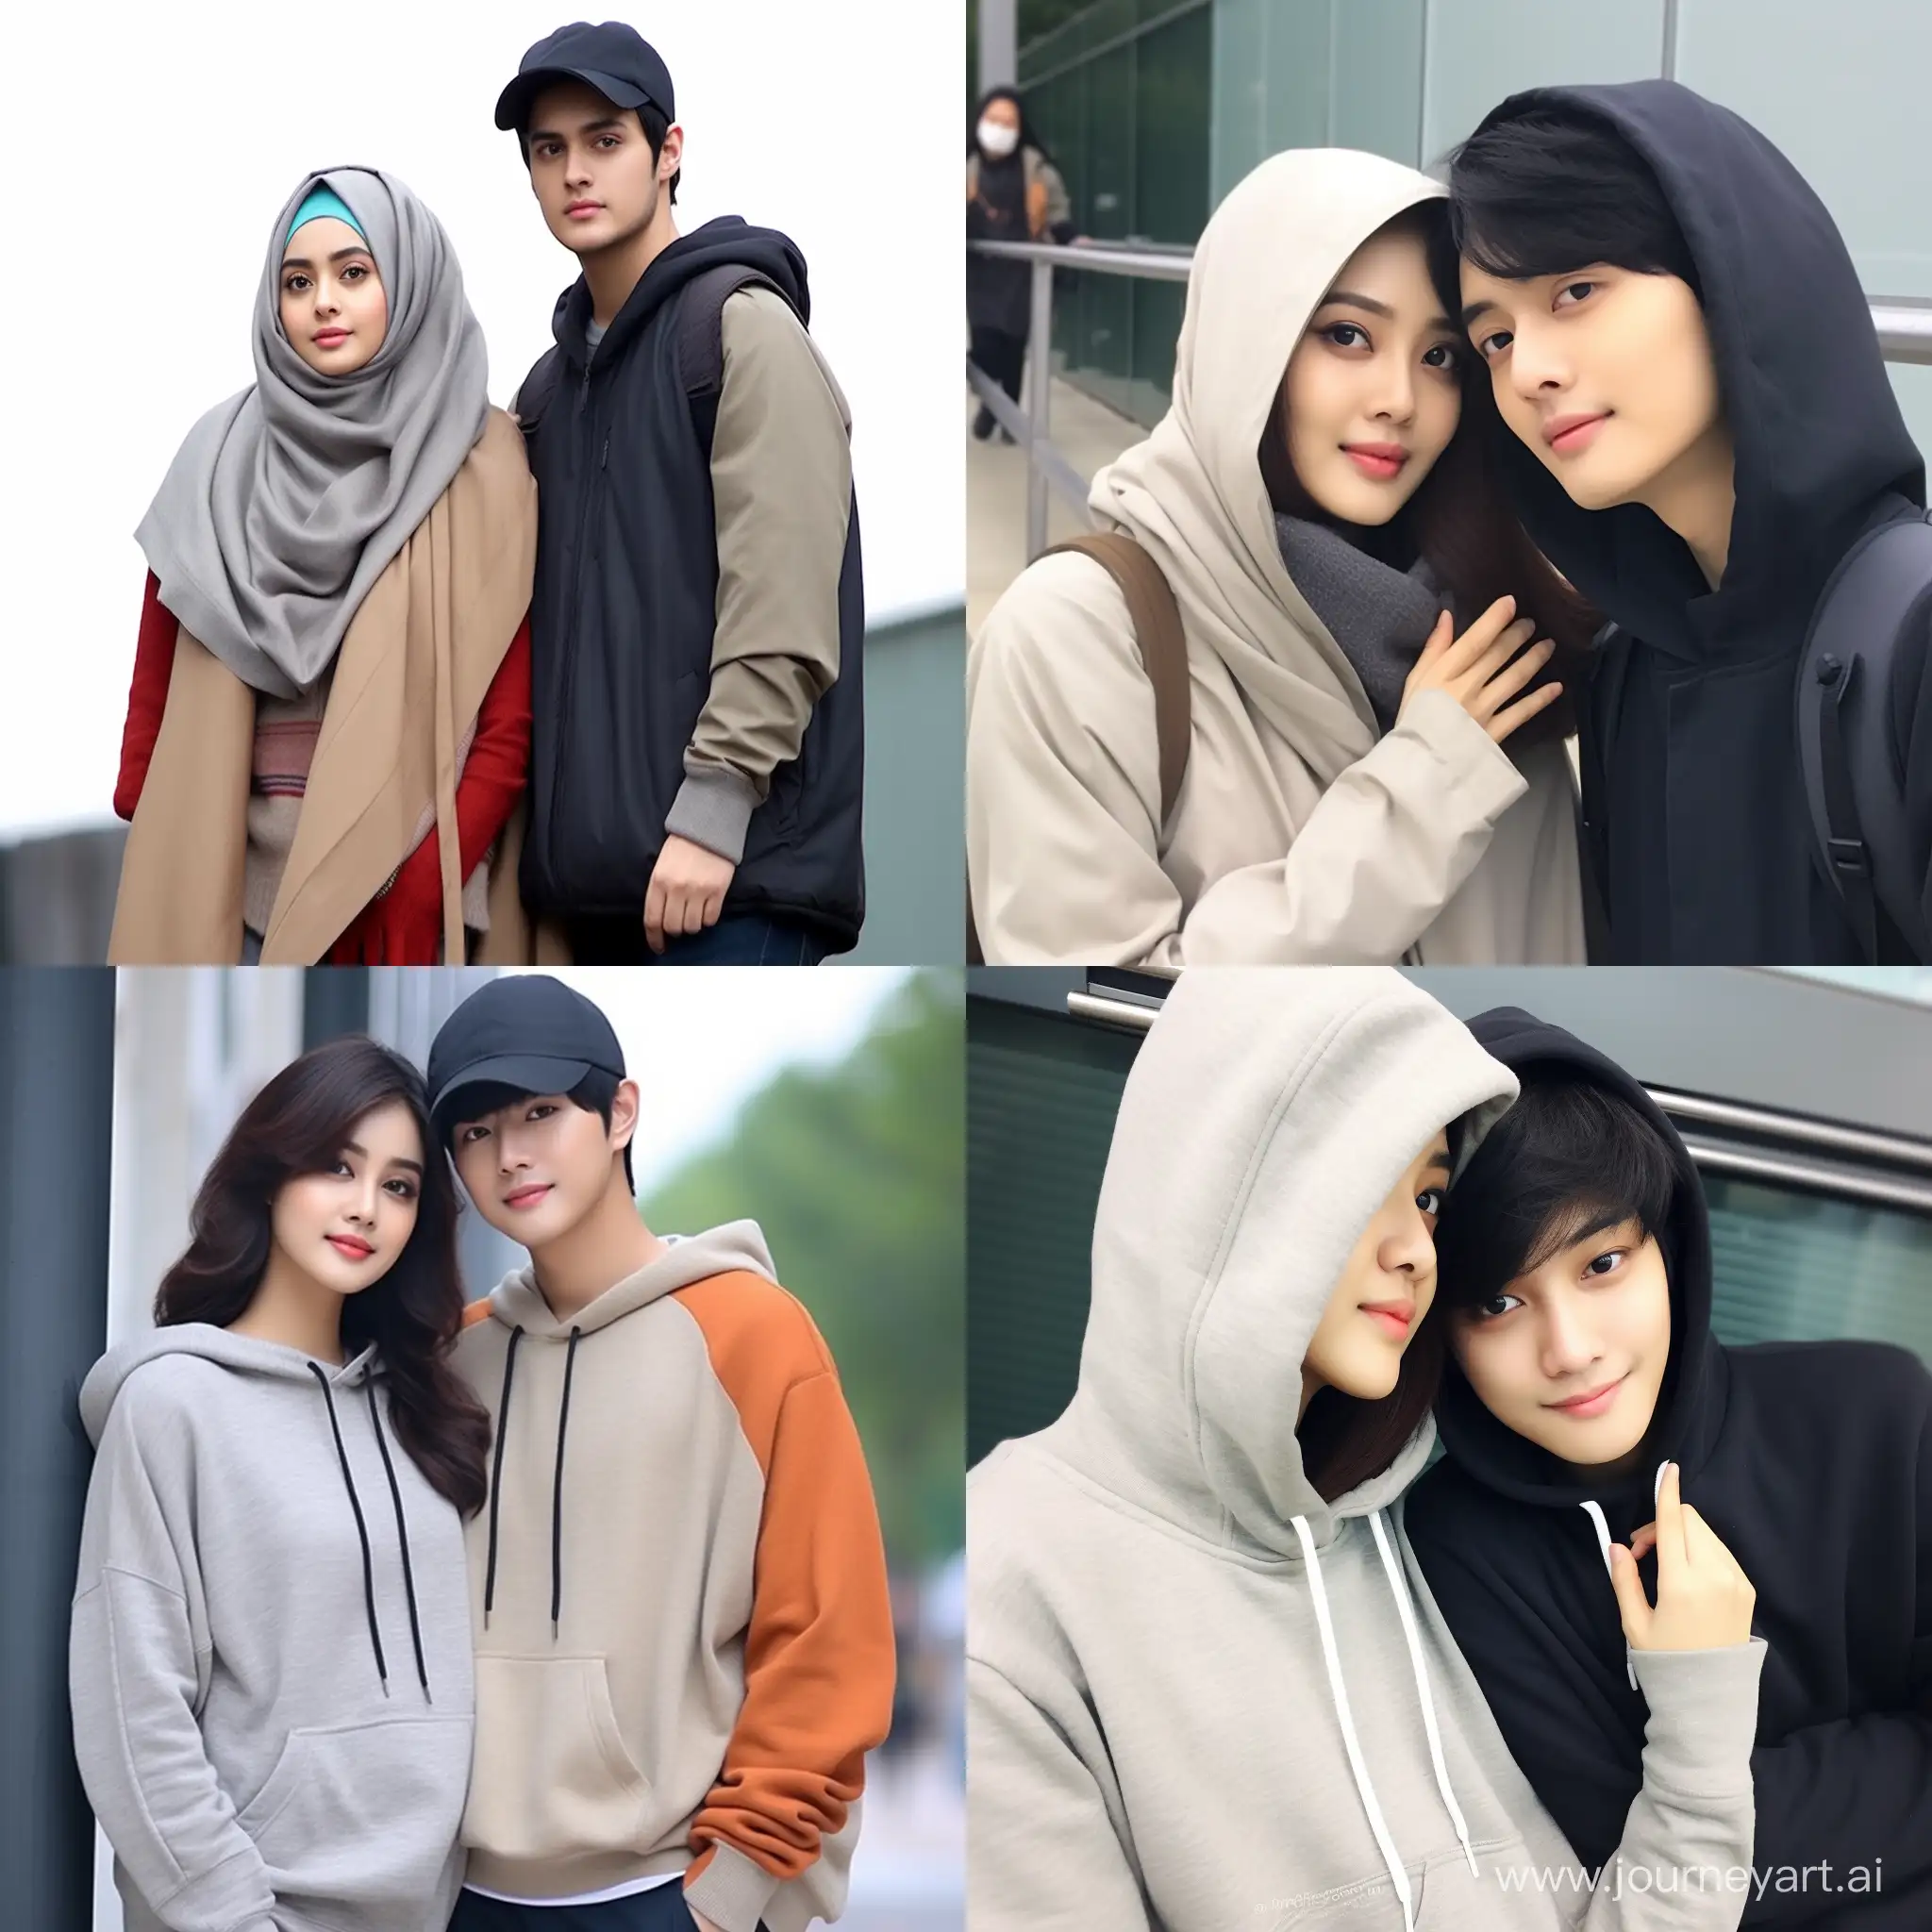 Affectionate-EXO-Member-and-Indonesian-Hijabi-Girl-Captured-in-Loving-Embrace